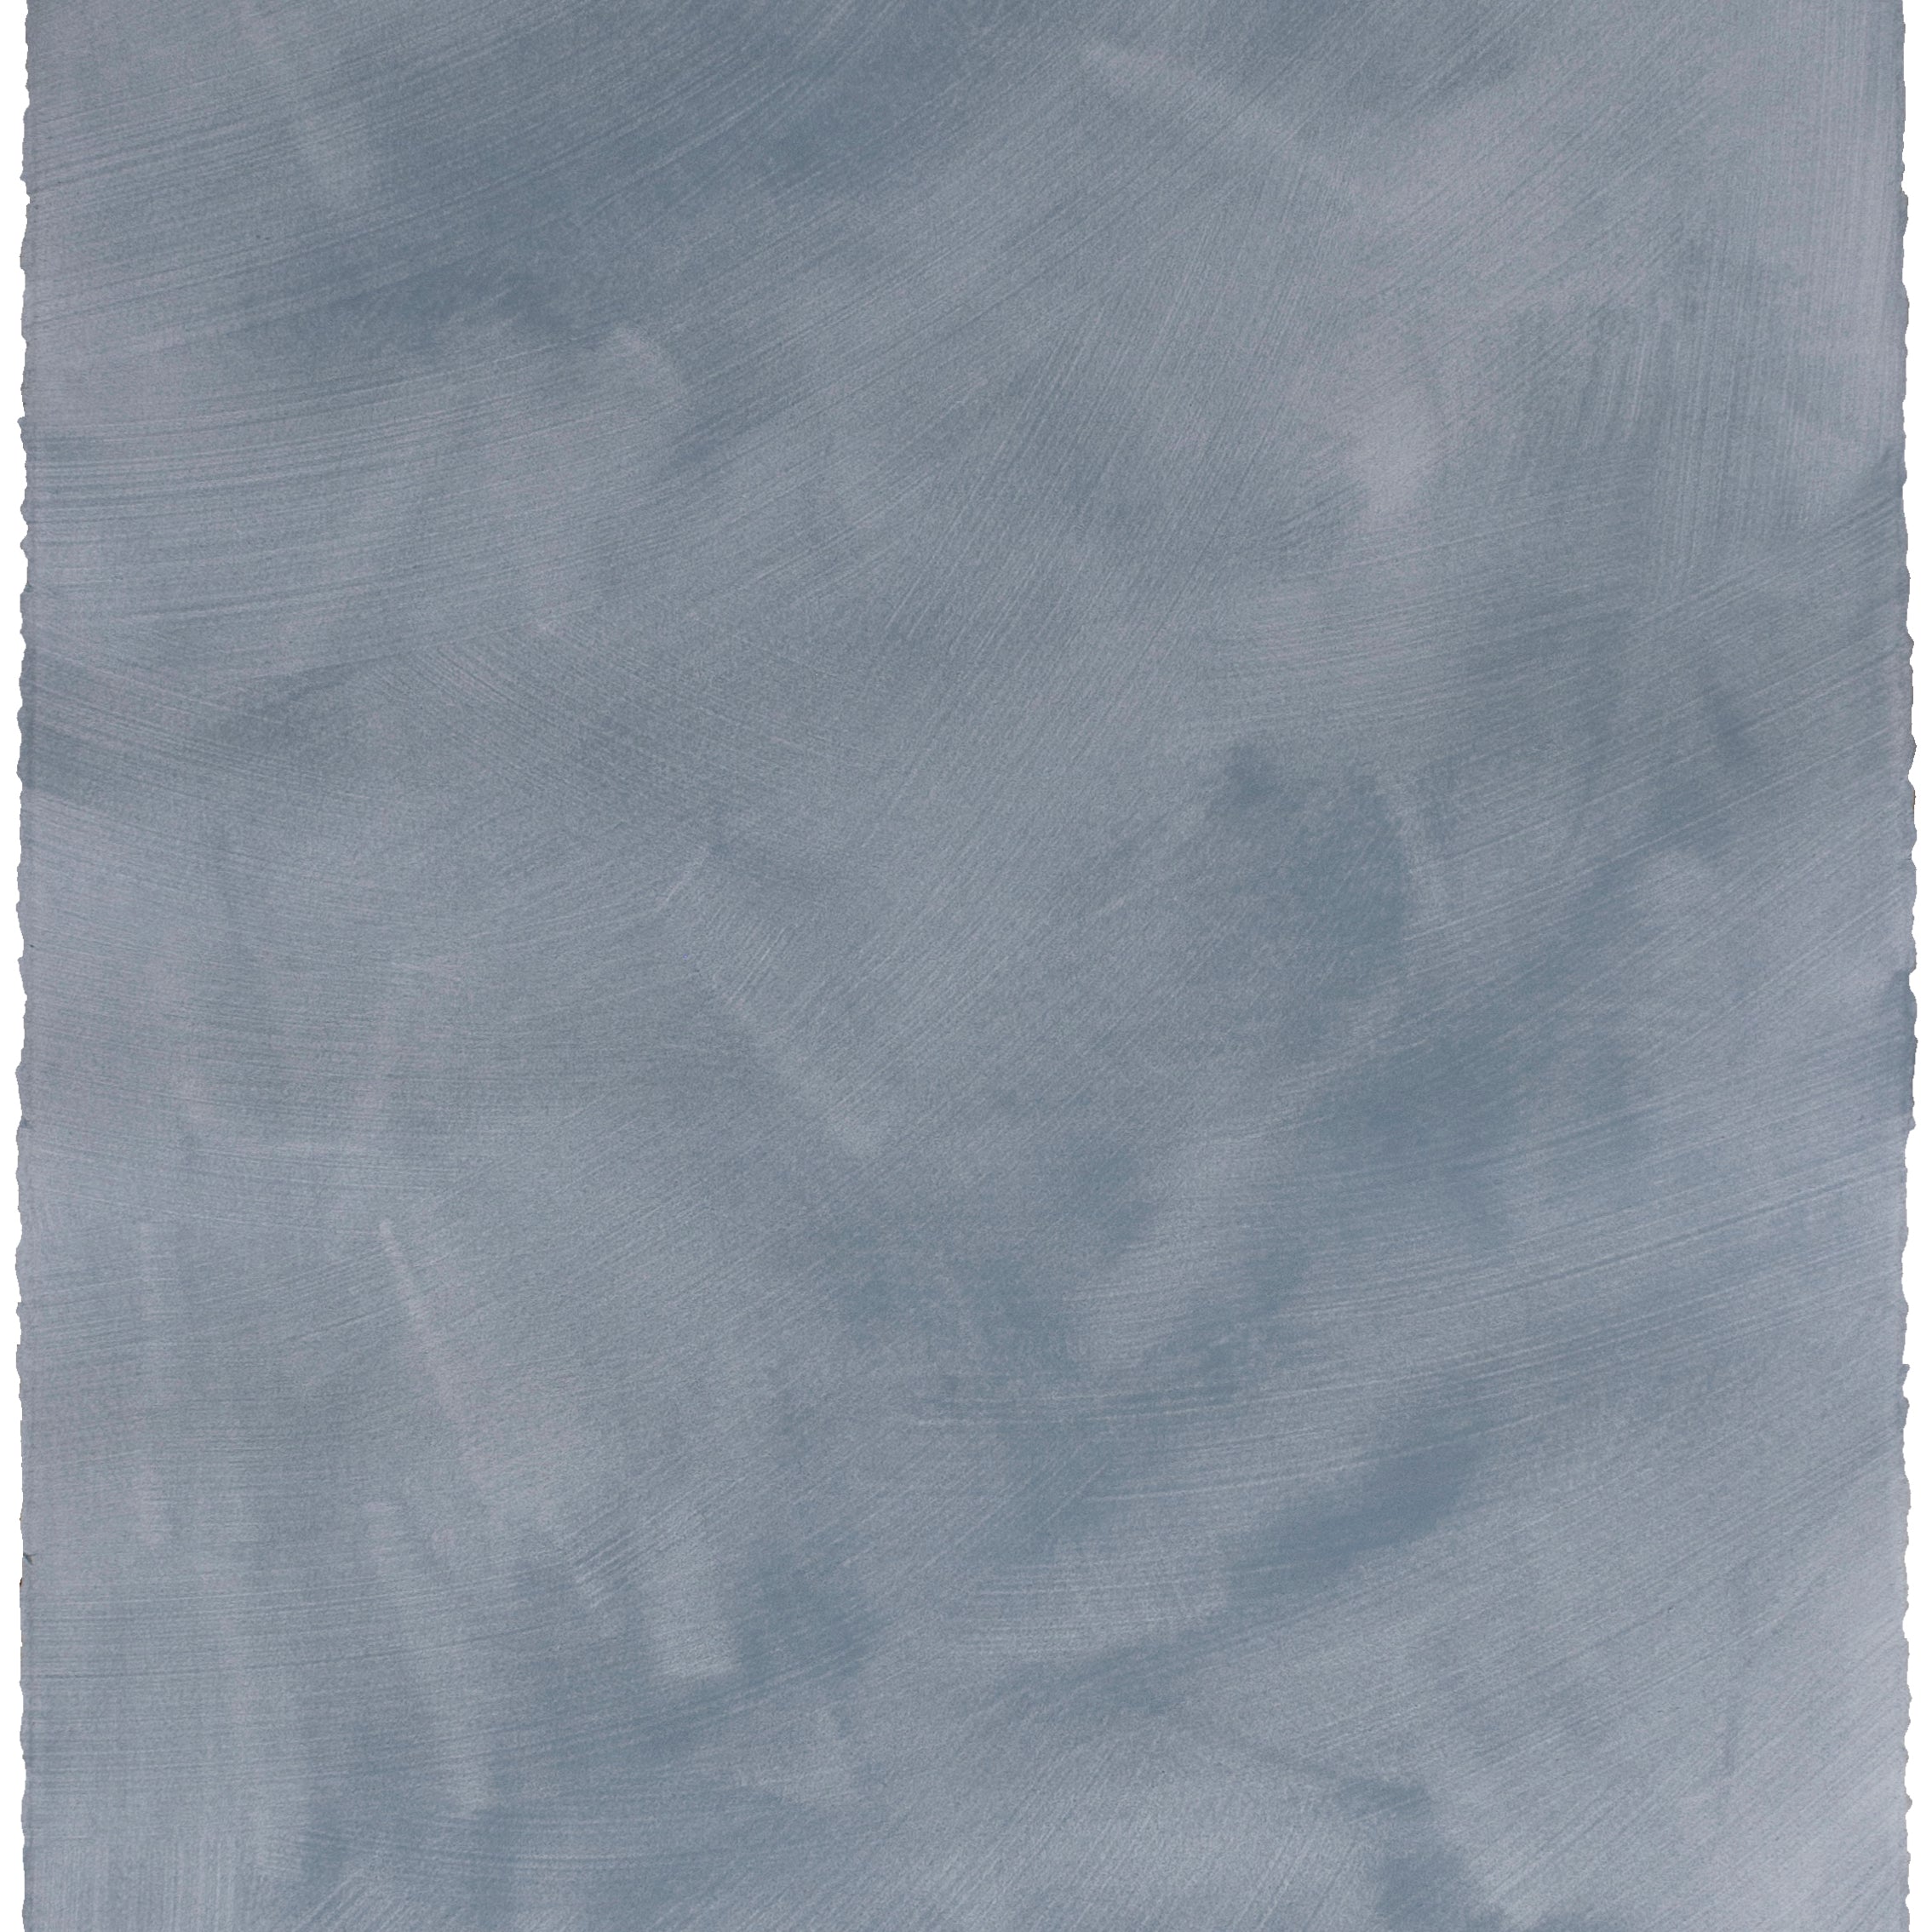 Sheet of hand-painted wallpaper in blue gray with an irregular brushed texture.